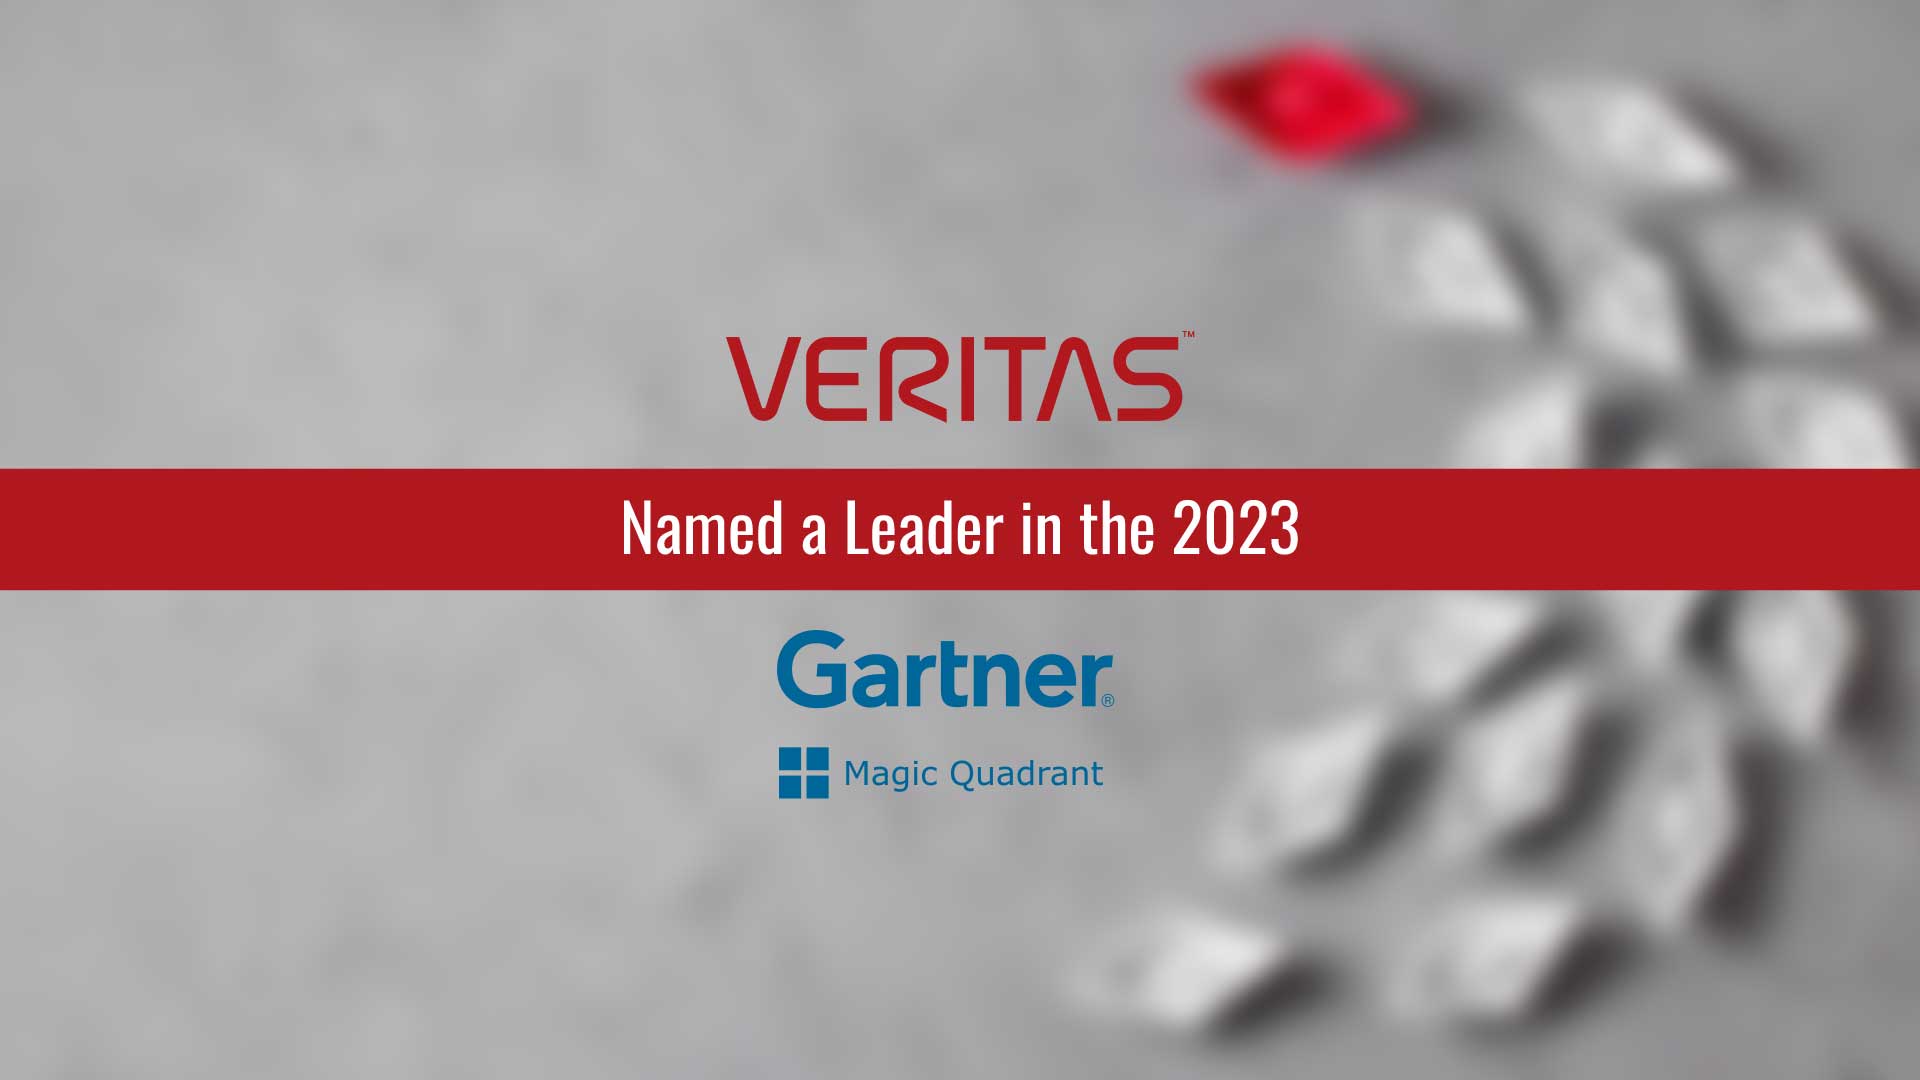 Veritas Named a Leader in the 2023 Gartner® Magic Quadrant™ for Enterprise Backup and Recovery Software Solutions for the 18th Time